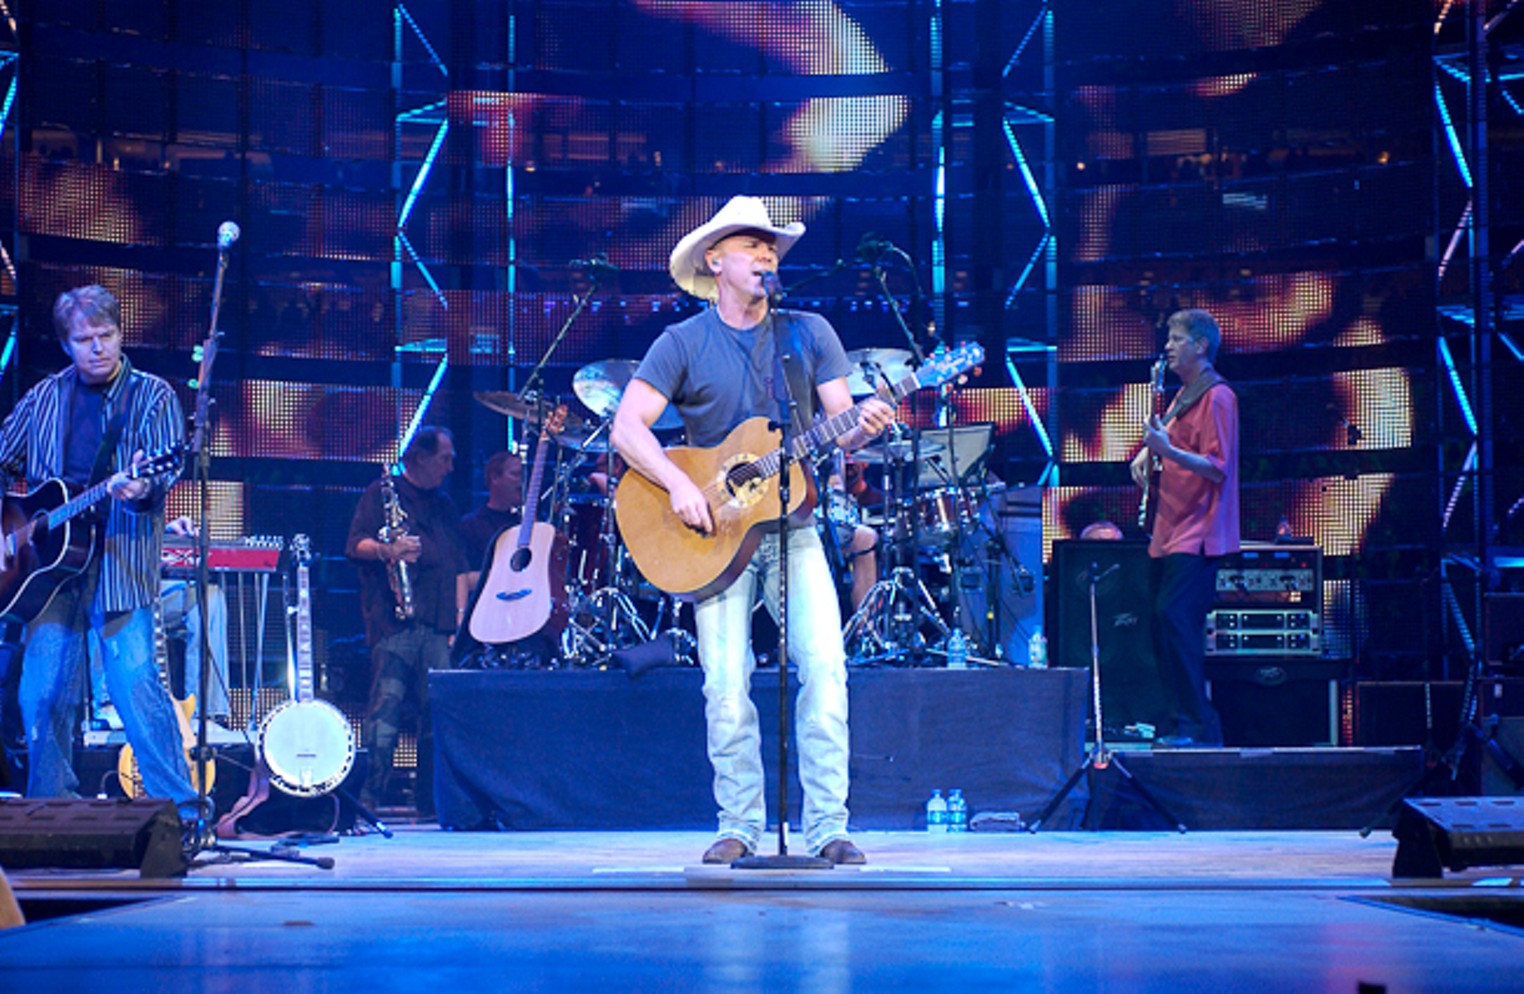 Kenny Chesney at the Houston Livestock Show and Rodeo Houston